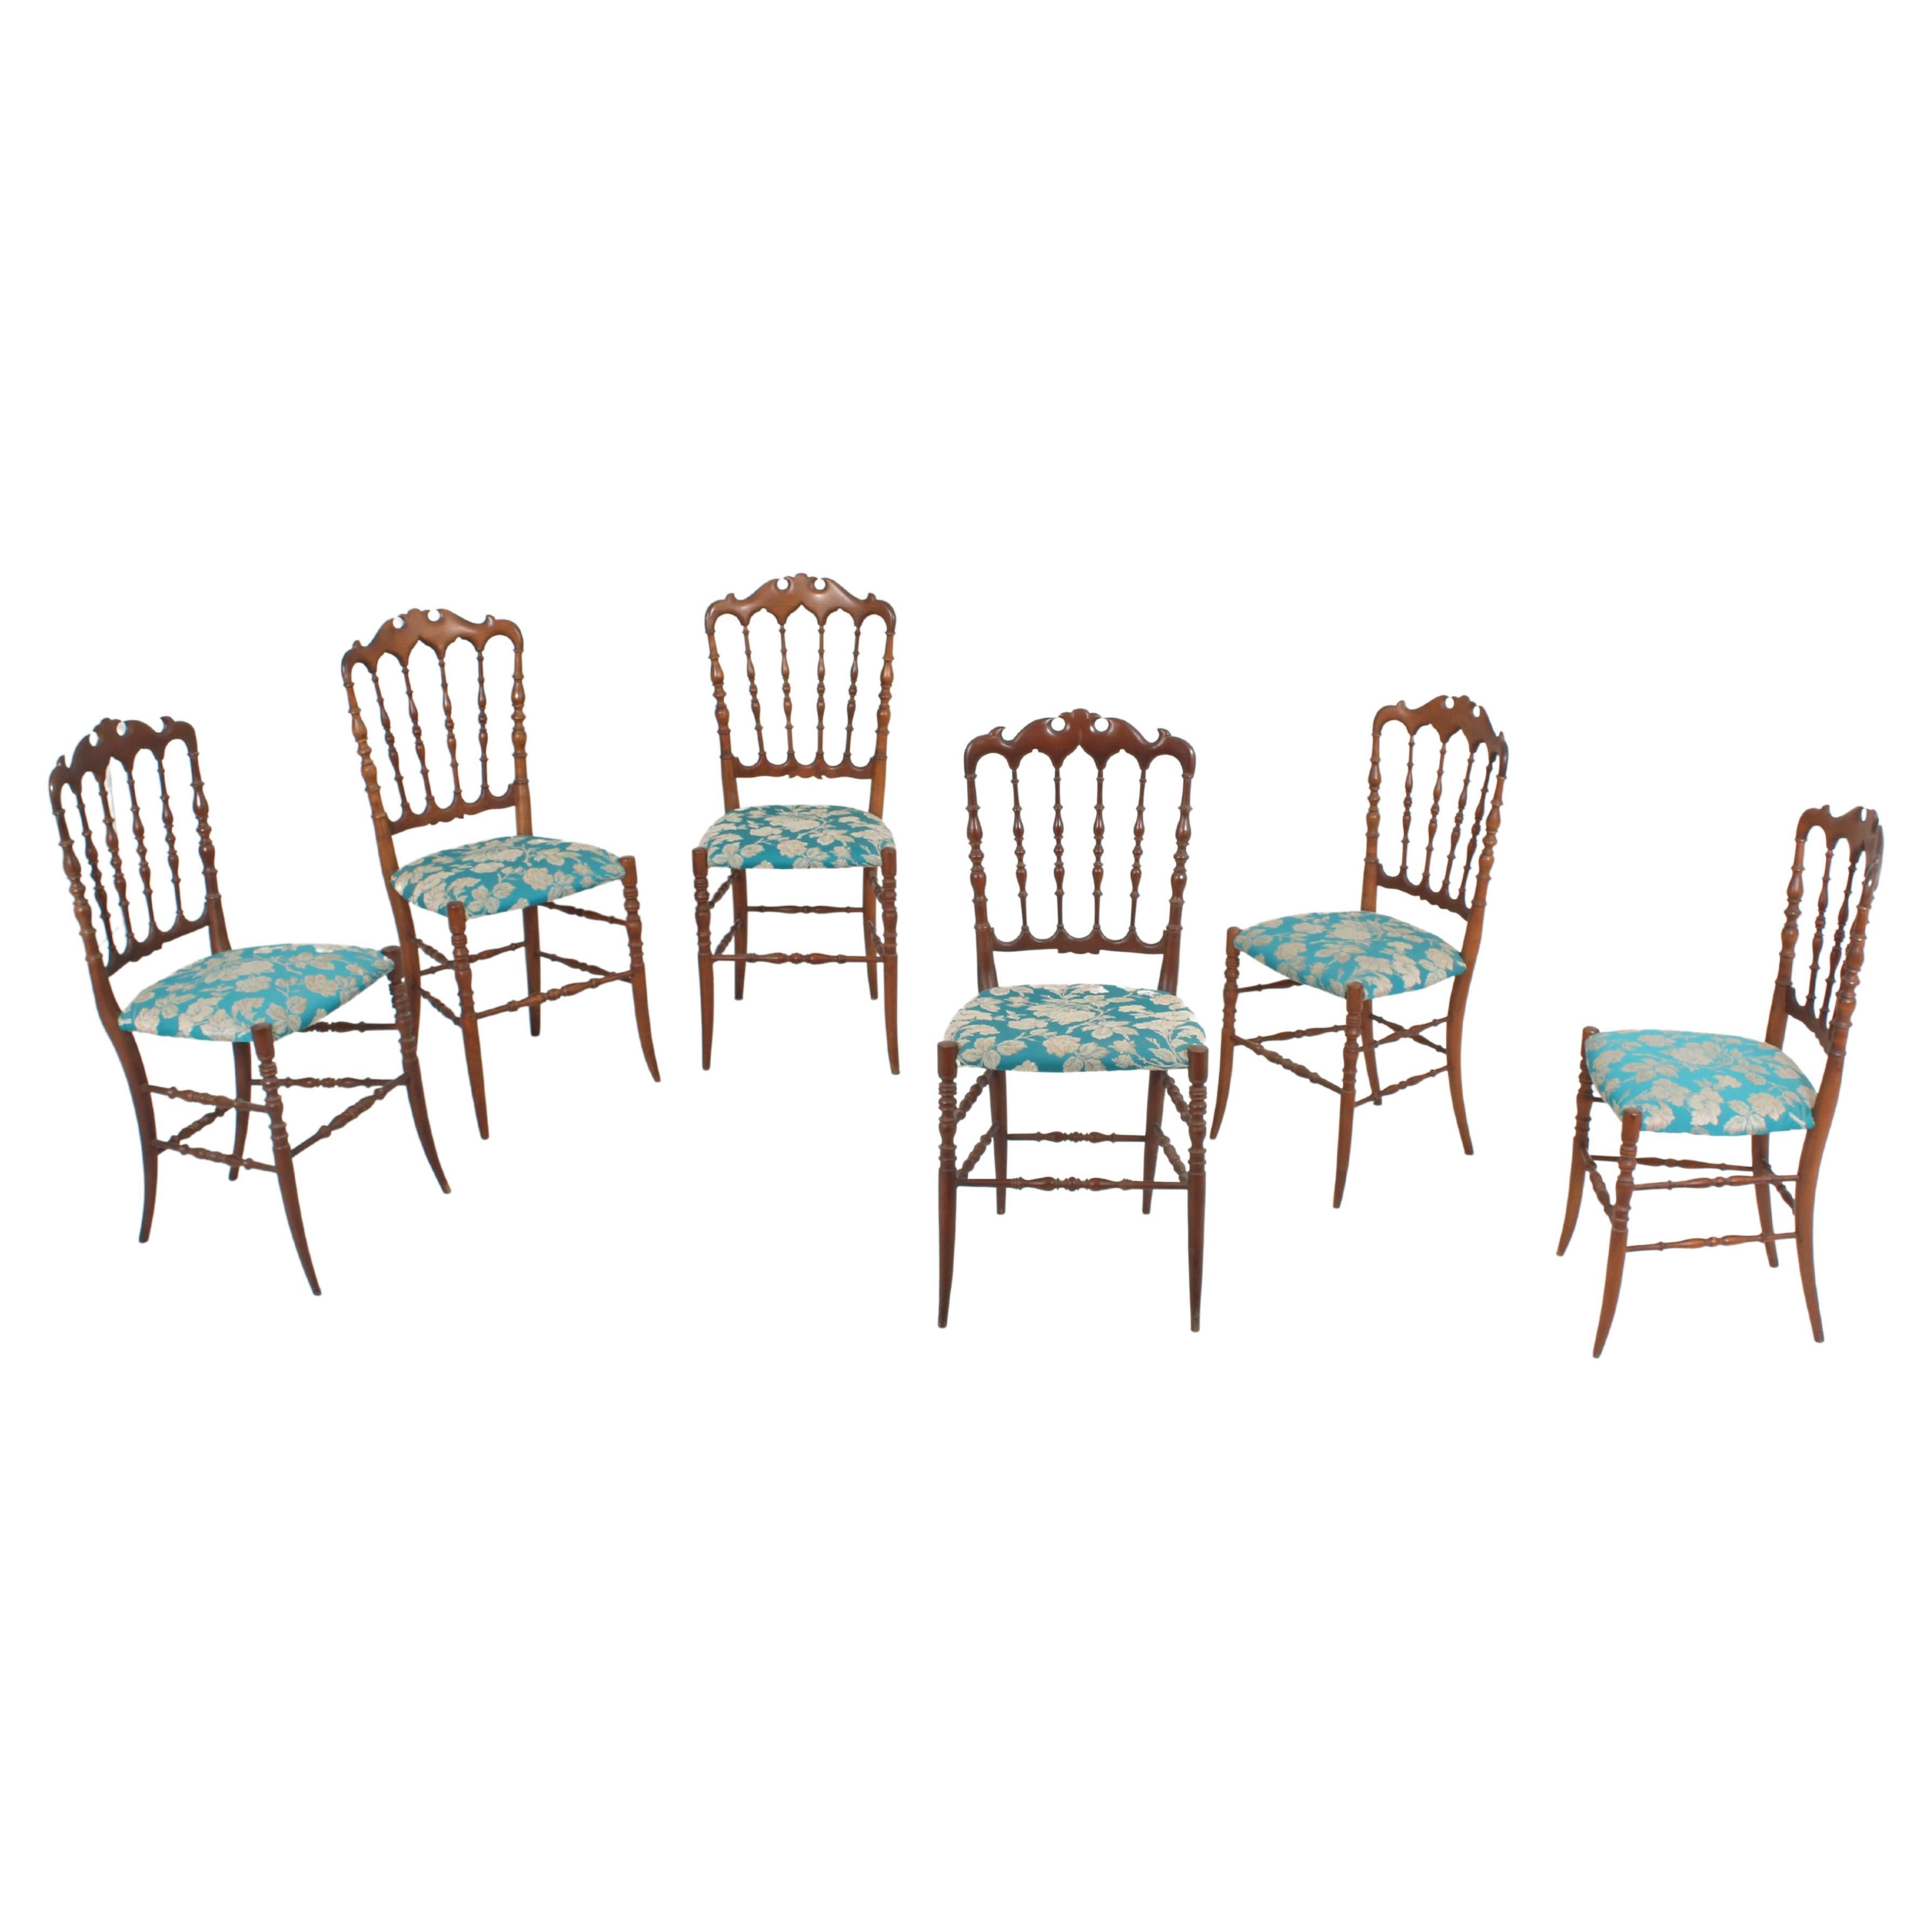 Mid-Century Chiavarina Wooden Chairs Set of 6, 1950s, Italy For Sale